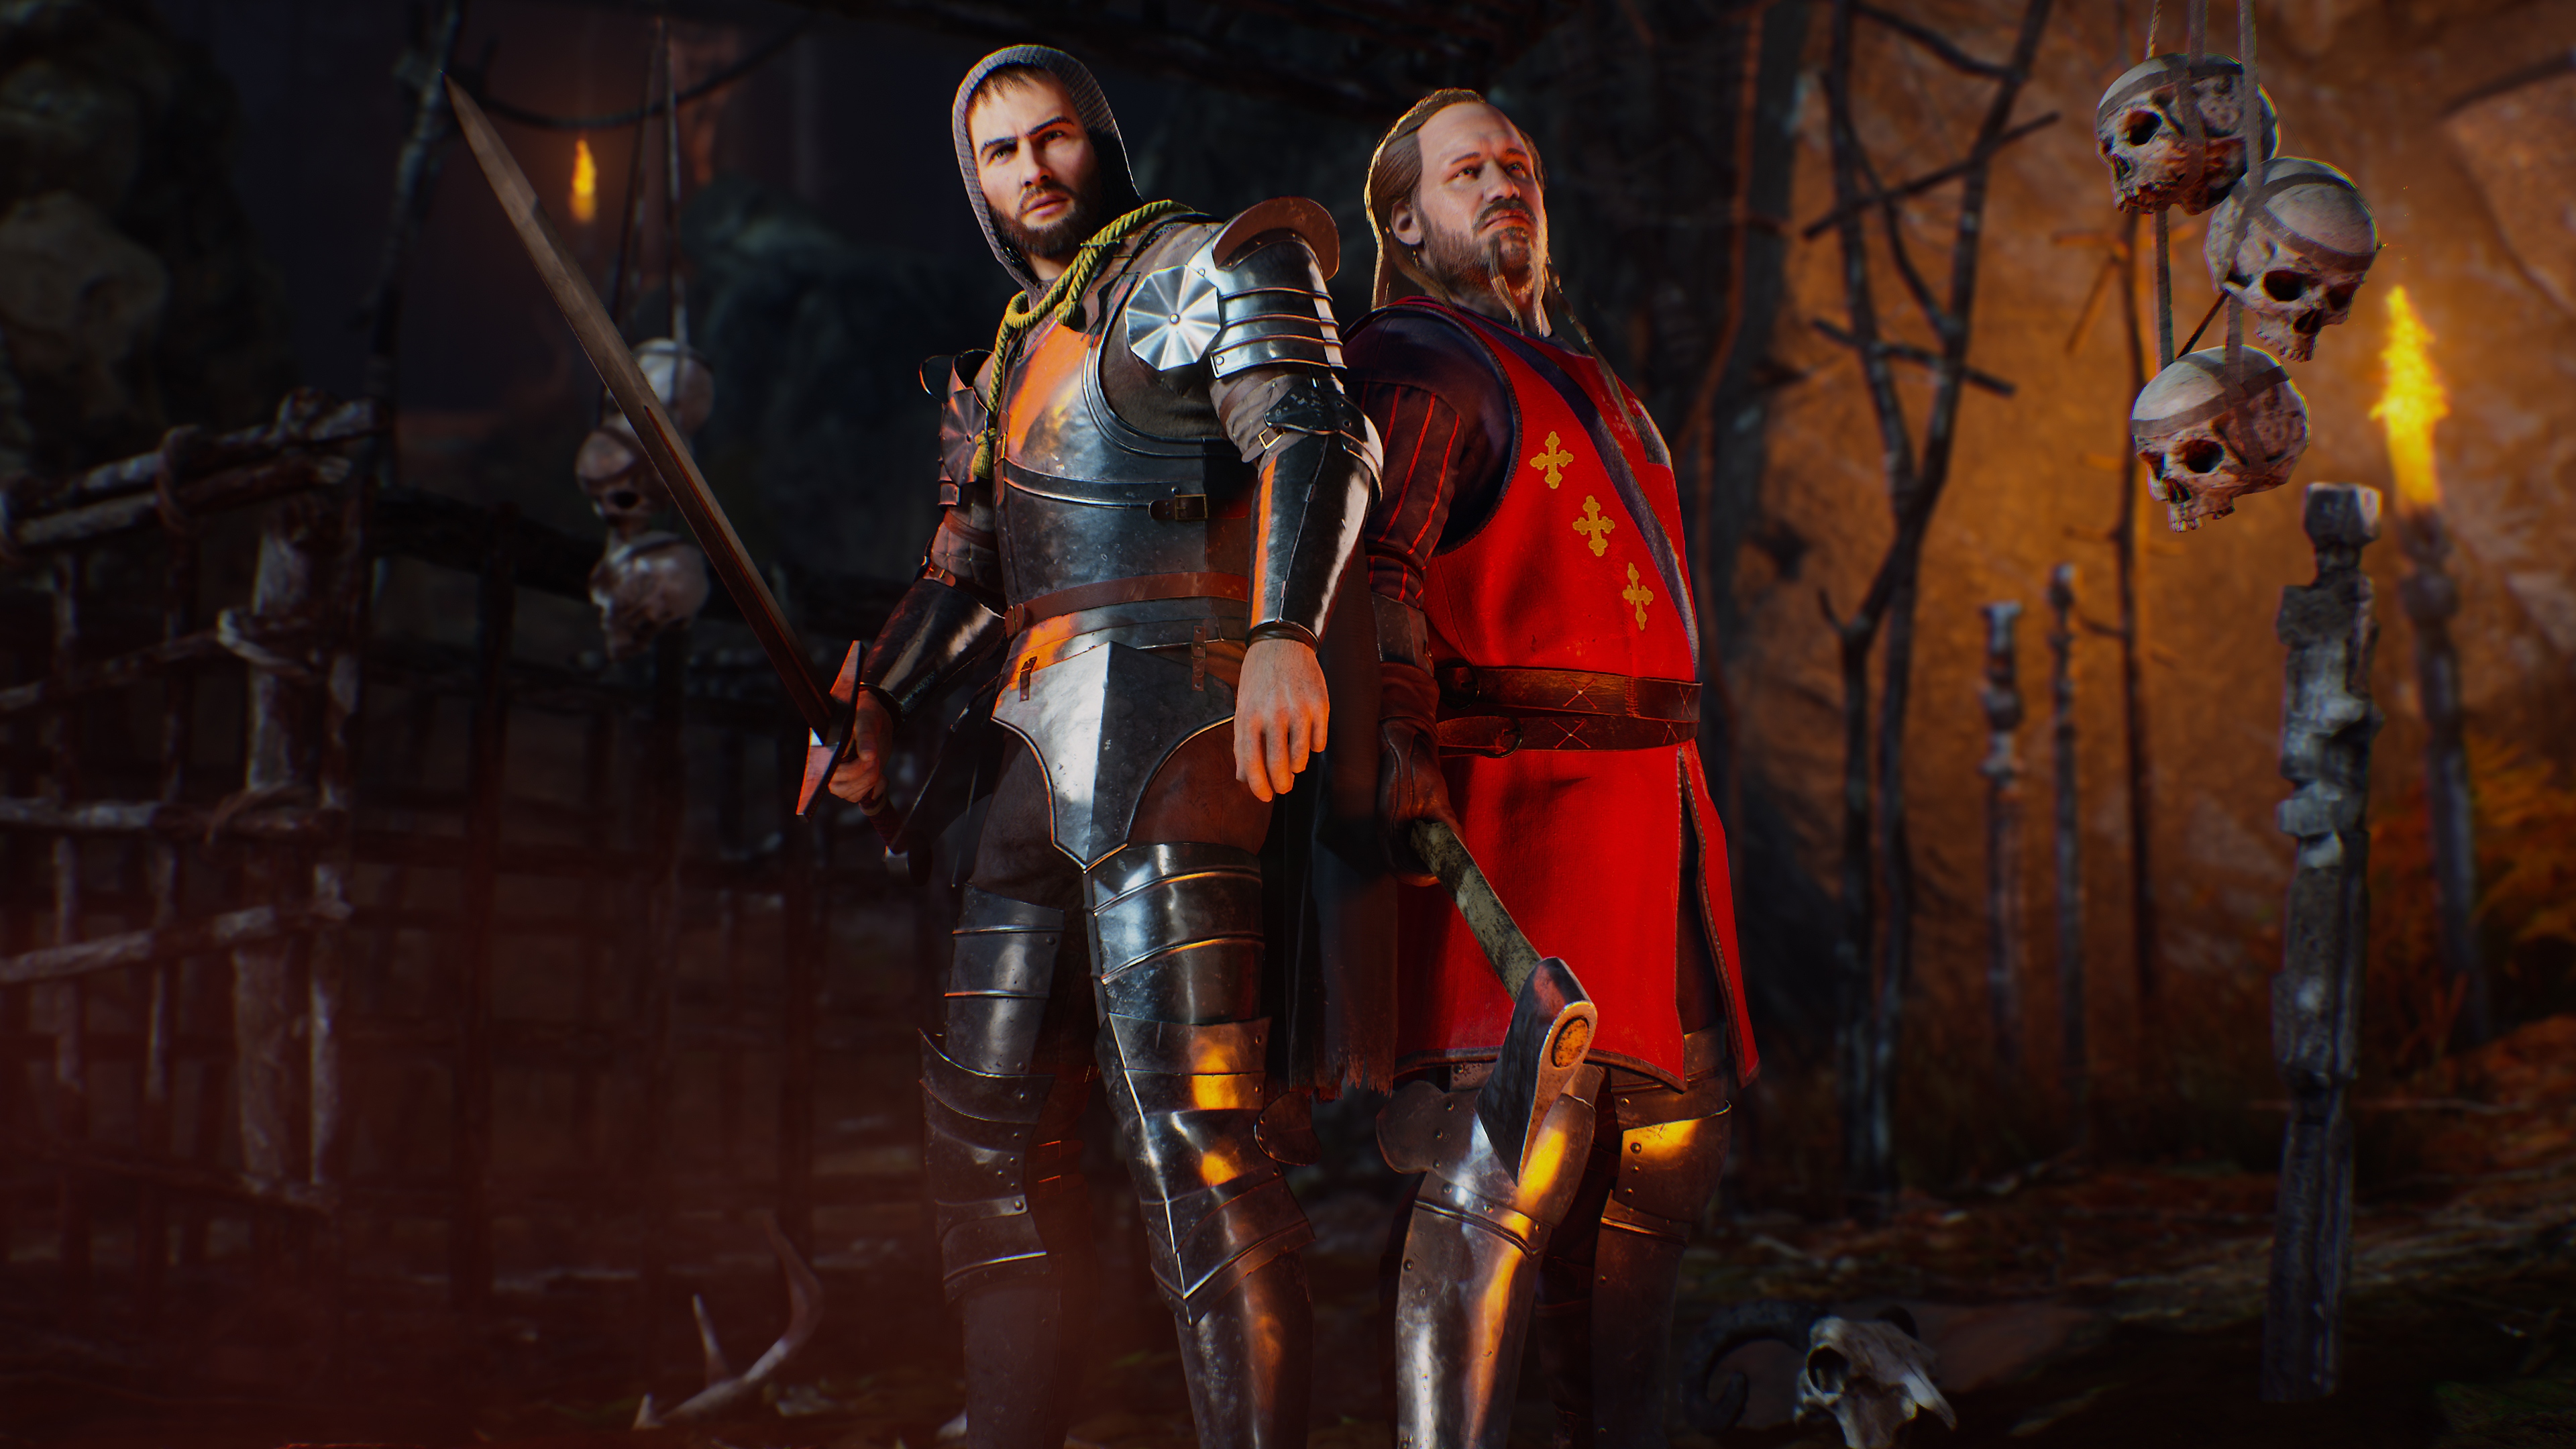 Evil Dead: The Game screenshot featuring two characters dressed in knight-like attire